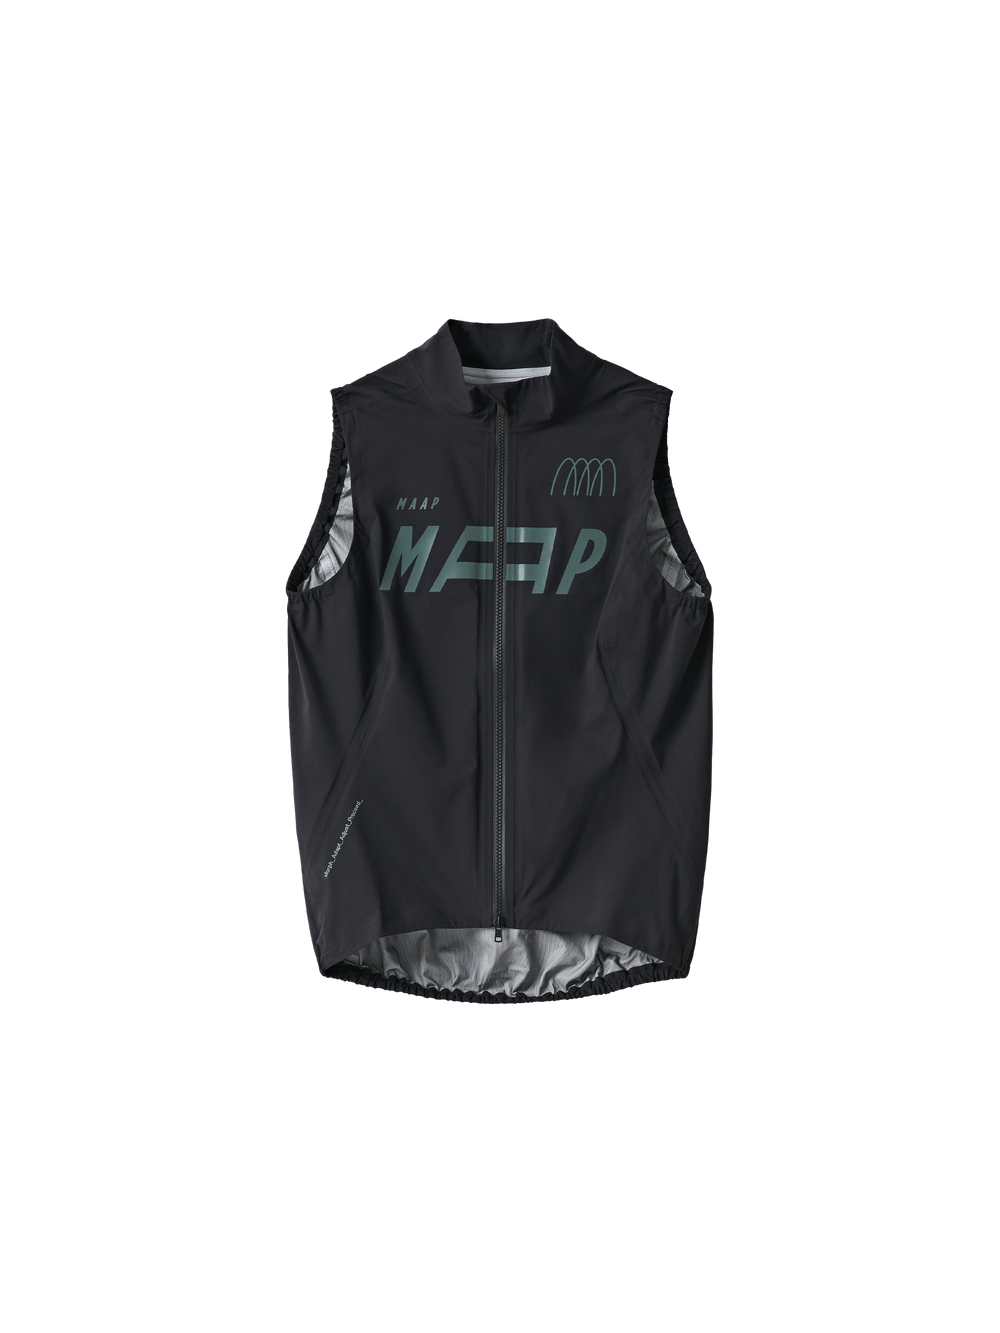 Product Image for Women's Adapt Atmos Vest